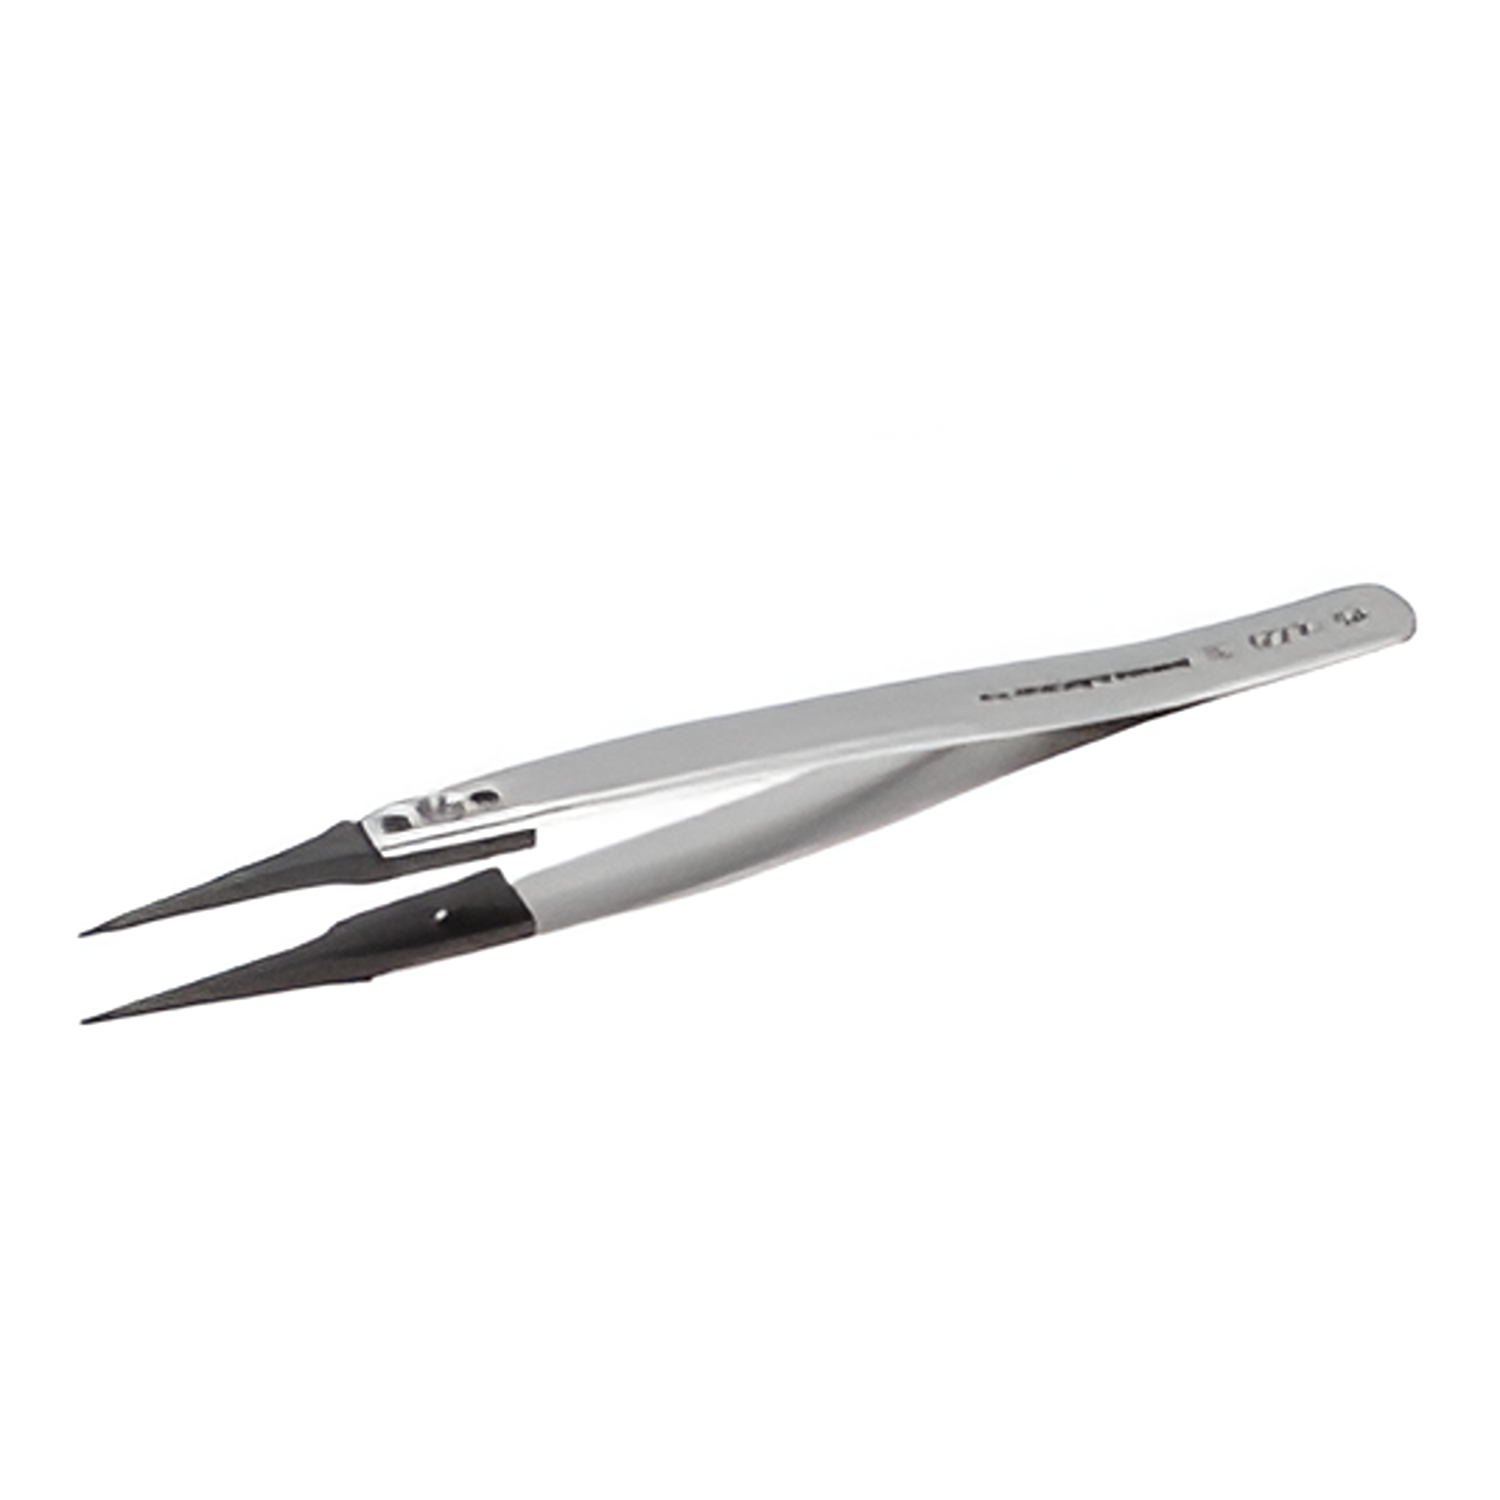 BAHCO TL 5CFR-SA Tweezers with Very Fine Pointed Carbon Fibre Tip - Premium Tweezers from BAHCO - Shop now at Yew Aik.